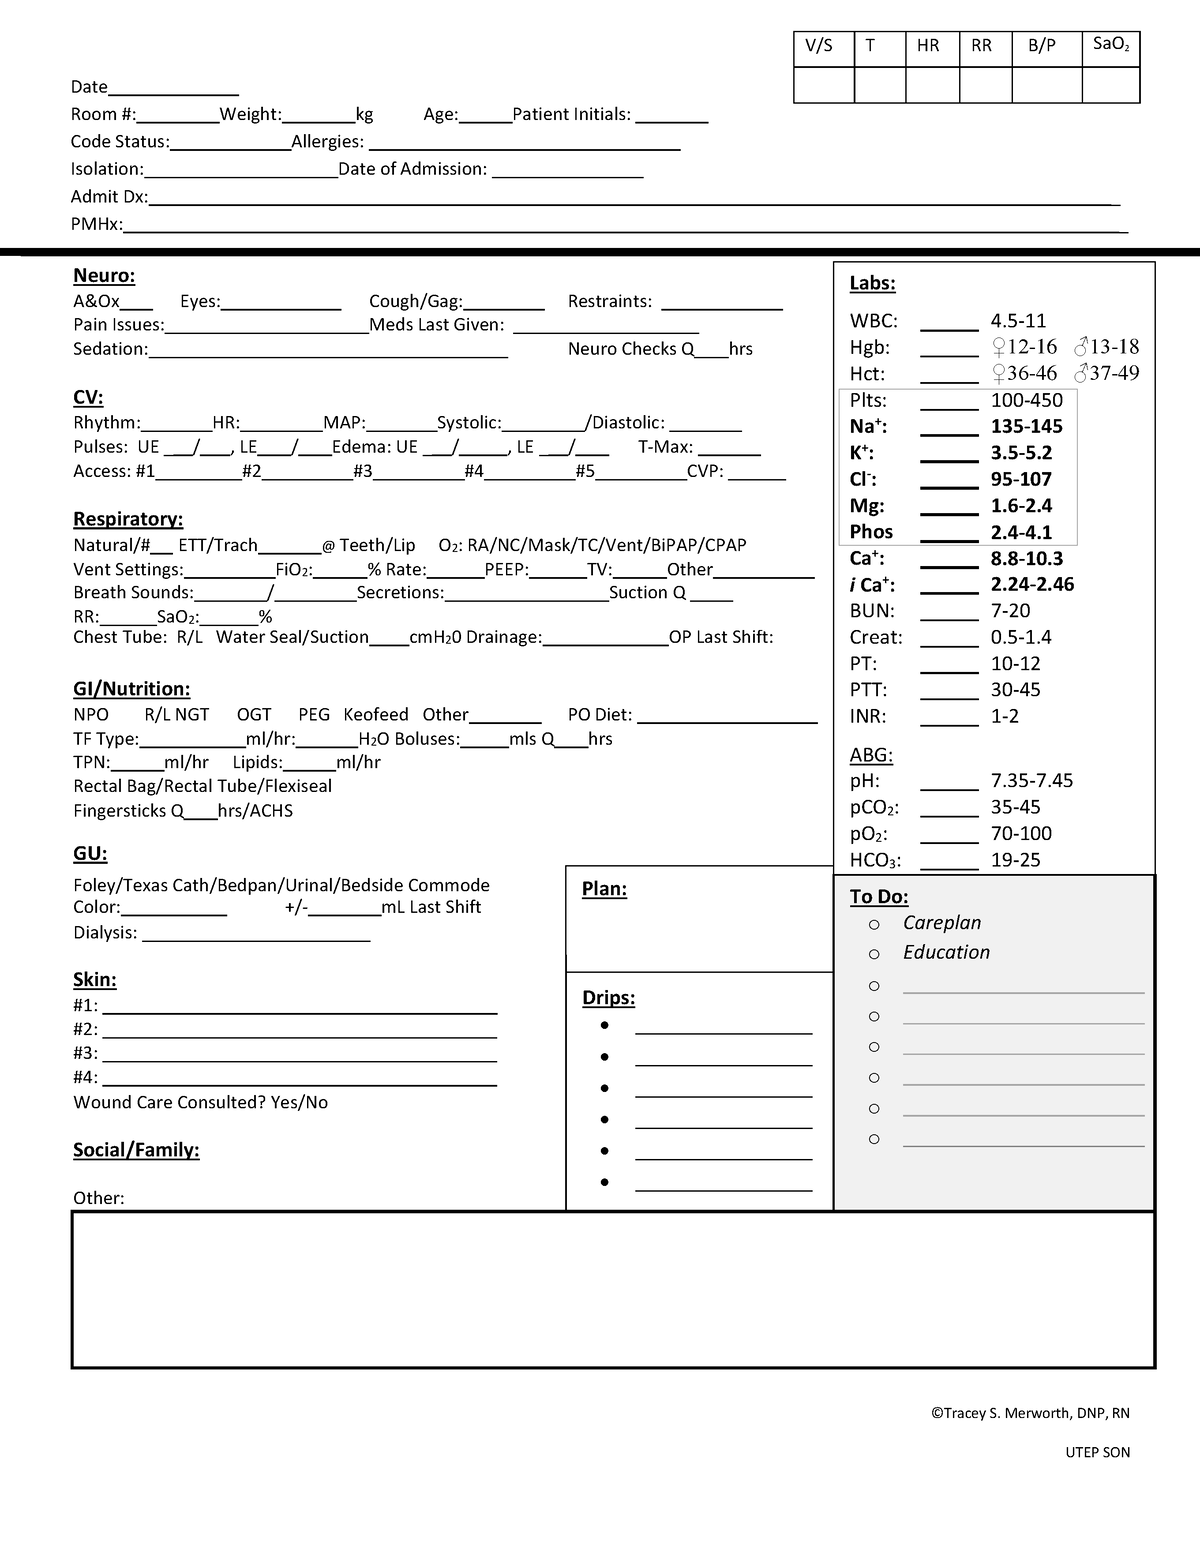 Report Sheet revised 2020 - Date Room #: Weight: kg Age: Patient ...